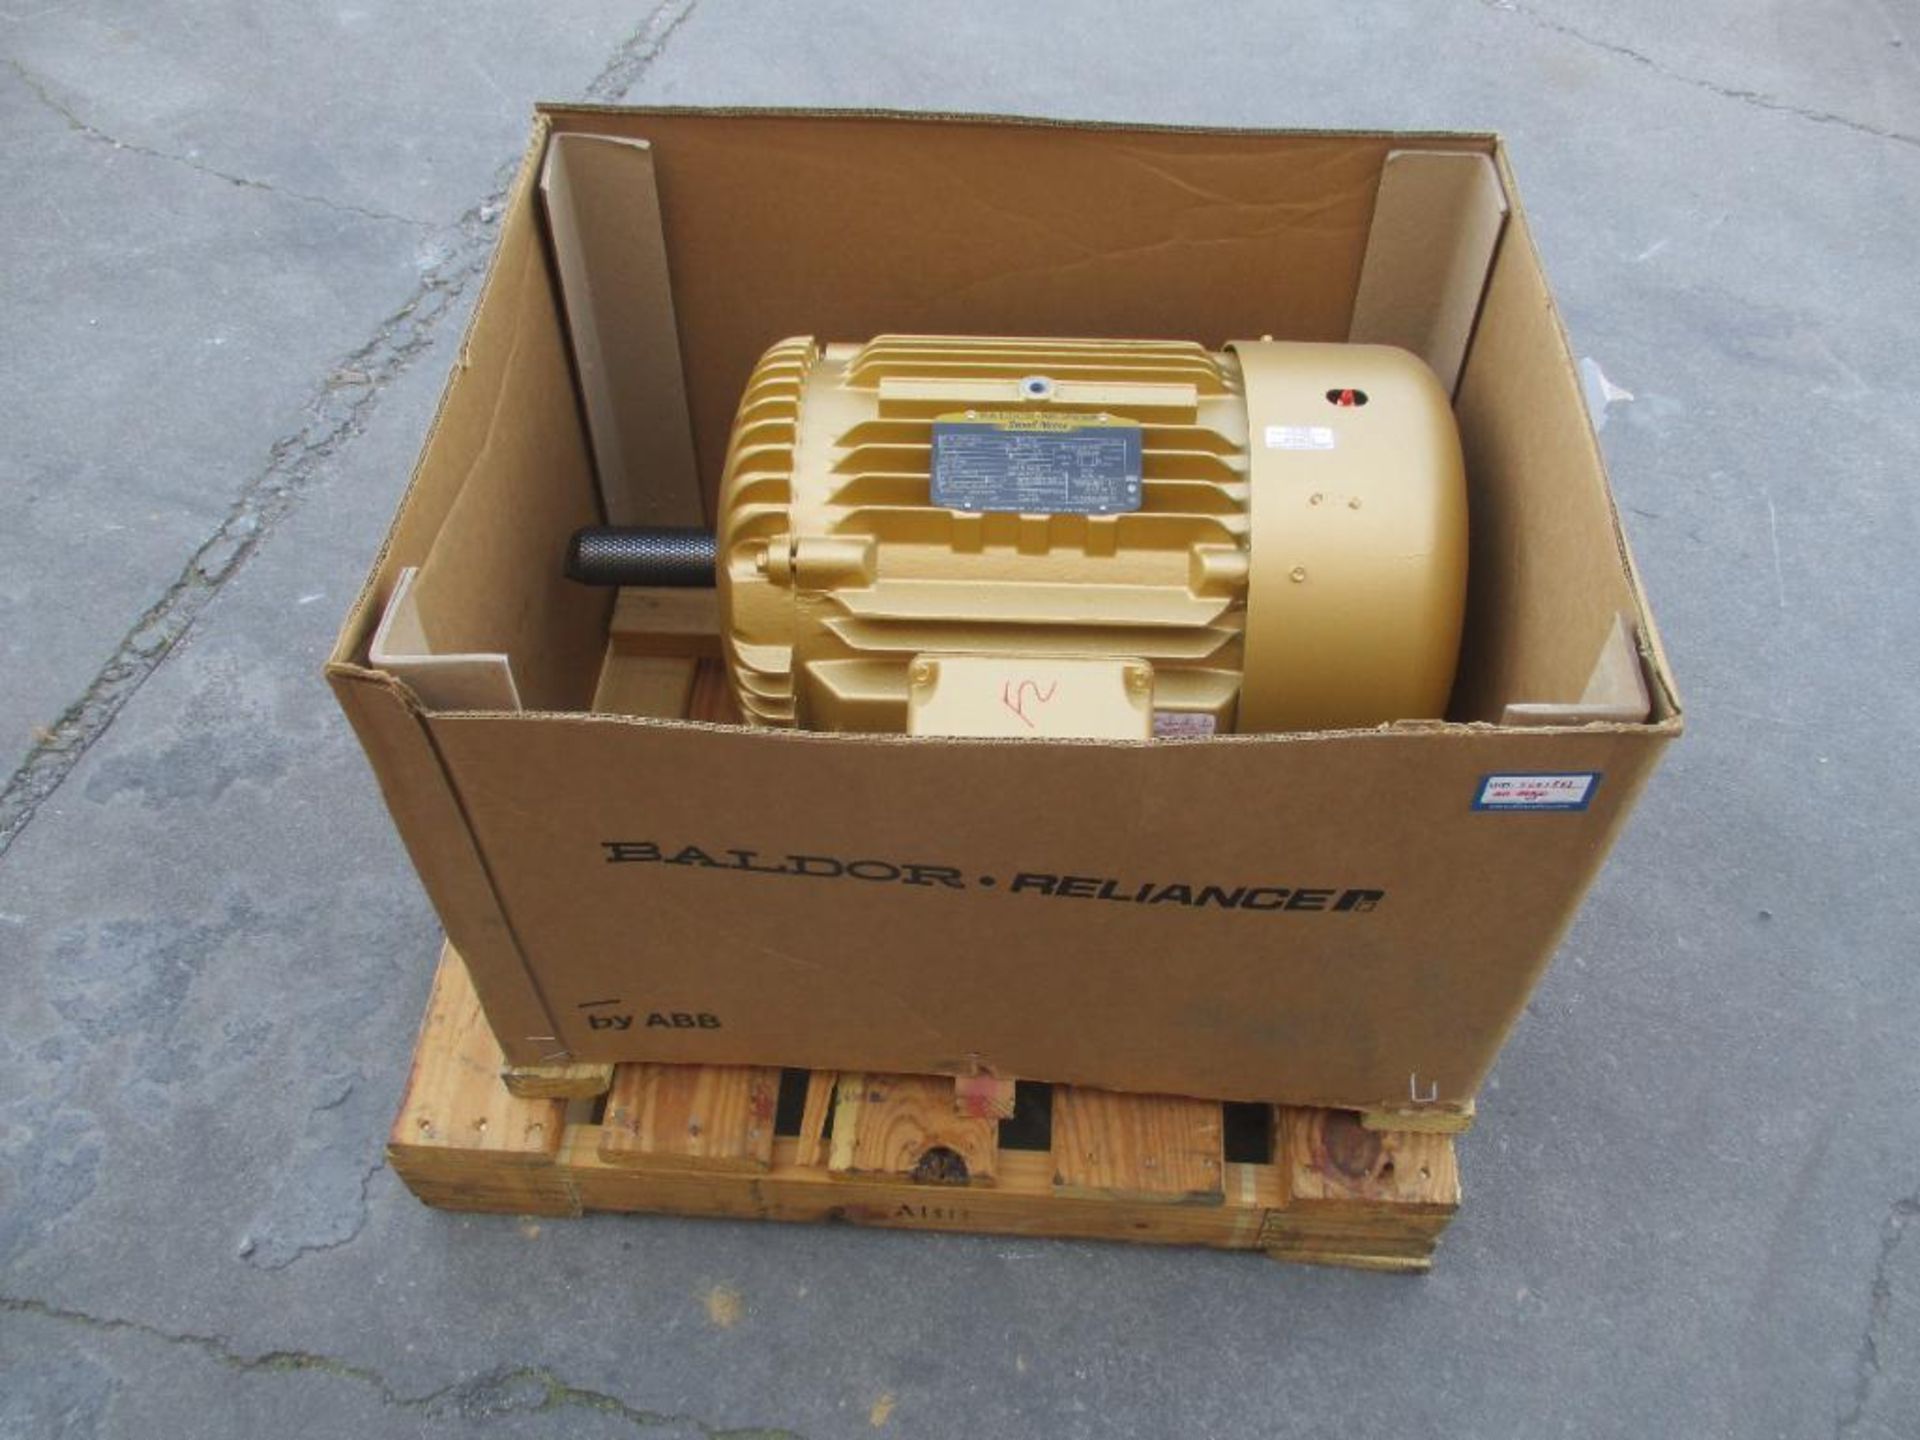 BALDOR 3 PHASE 30HP 1760RPM 286T FRAME A/C MOTOR P/N 1209300786-10 463# LBS (THIS LOT IS FOB KNOXVIL - Image 3 of 4